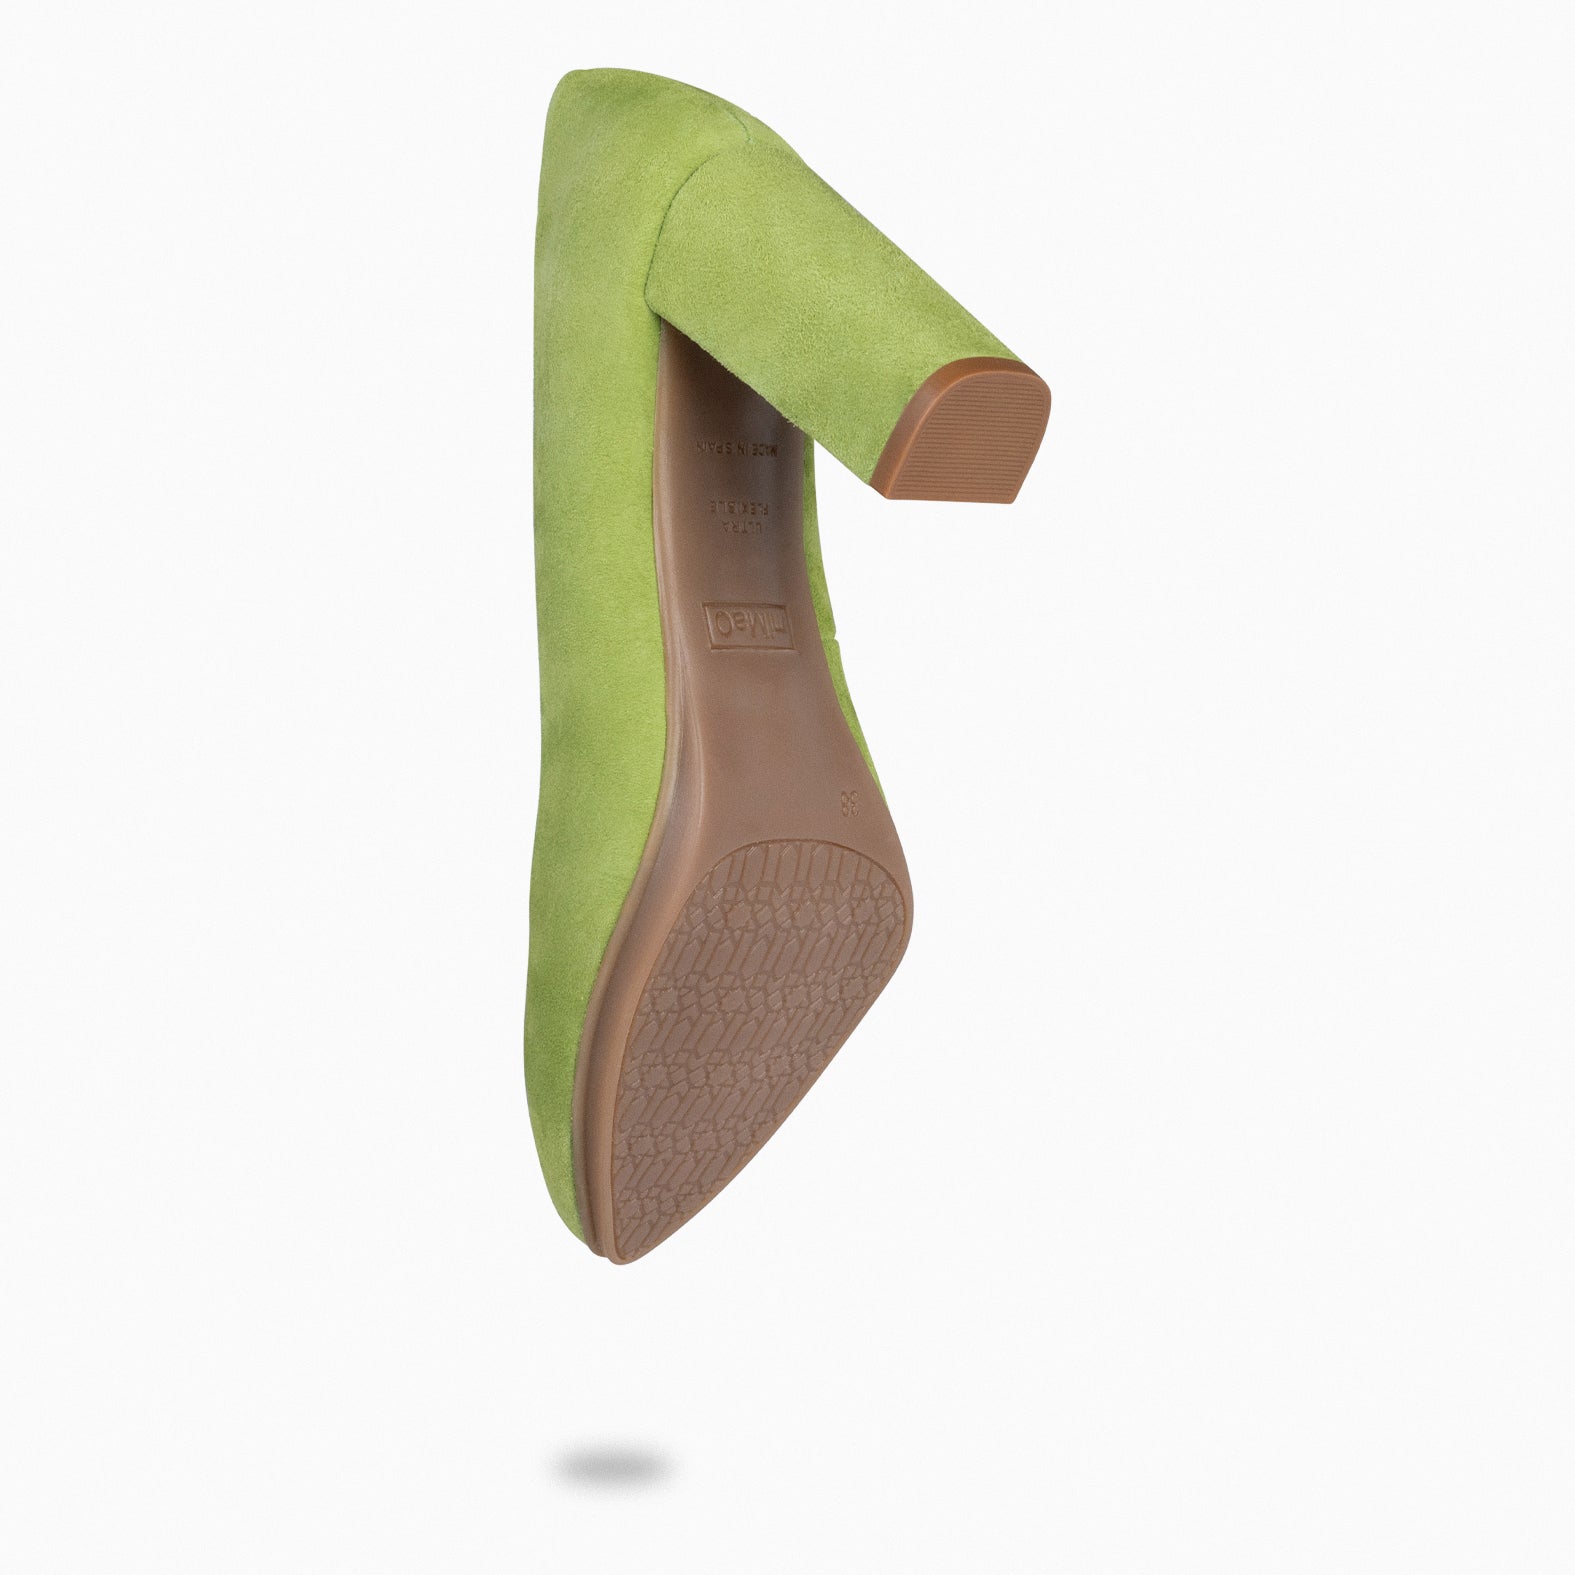 URBAN – PISTACHIO GREEN Suede high-heeled shoes 